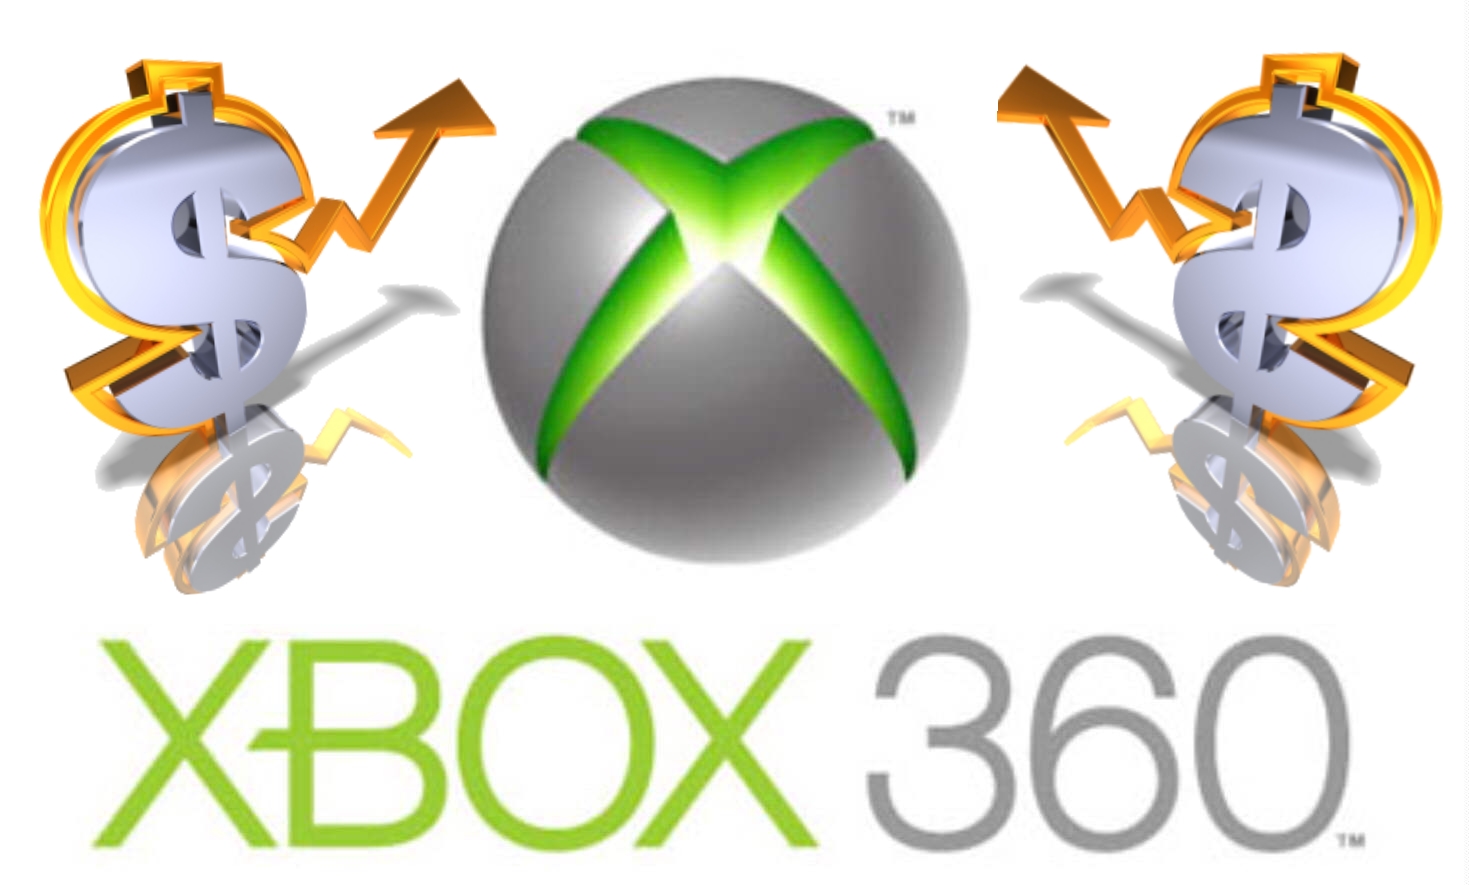 Xbox 360 helps bring in the money for Microsoft